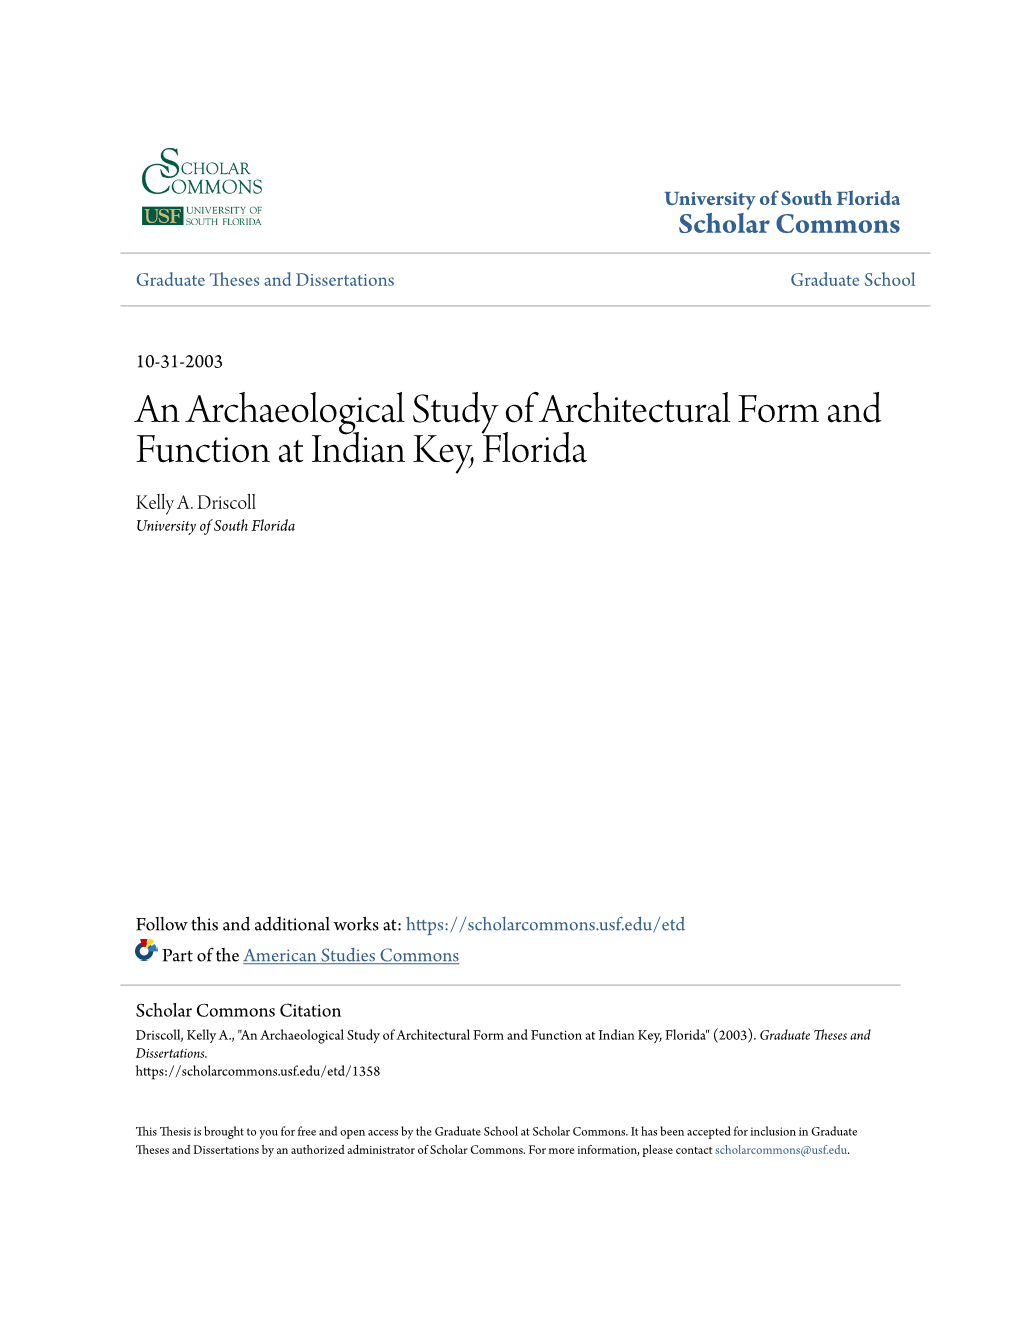 An Archaeological Study of Architectural Form and Function at Indian Key, Florida Kelly A